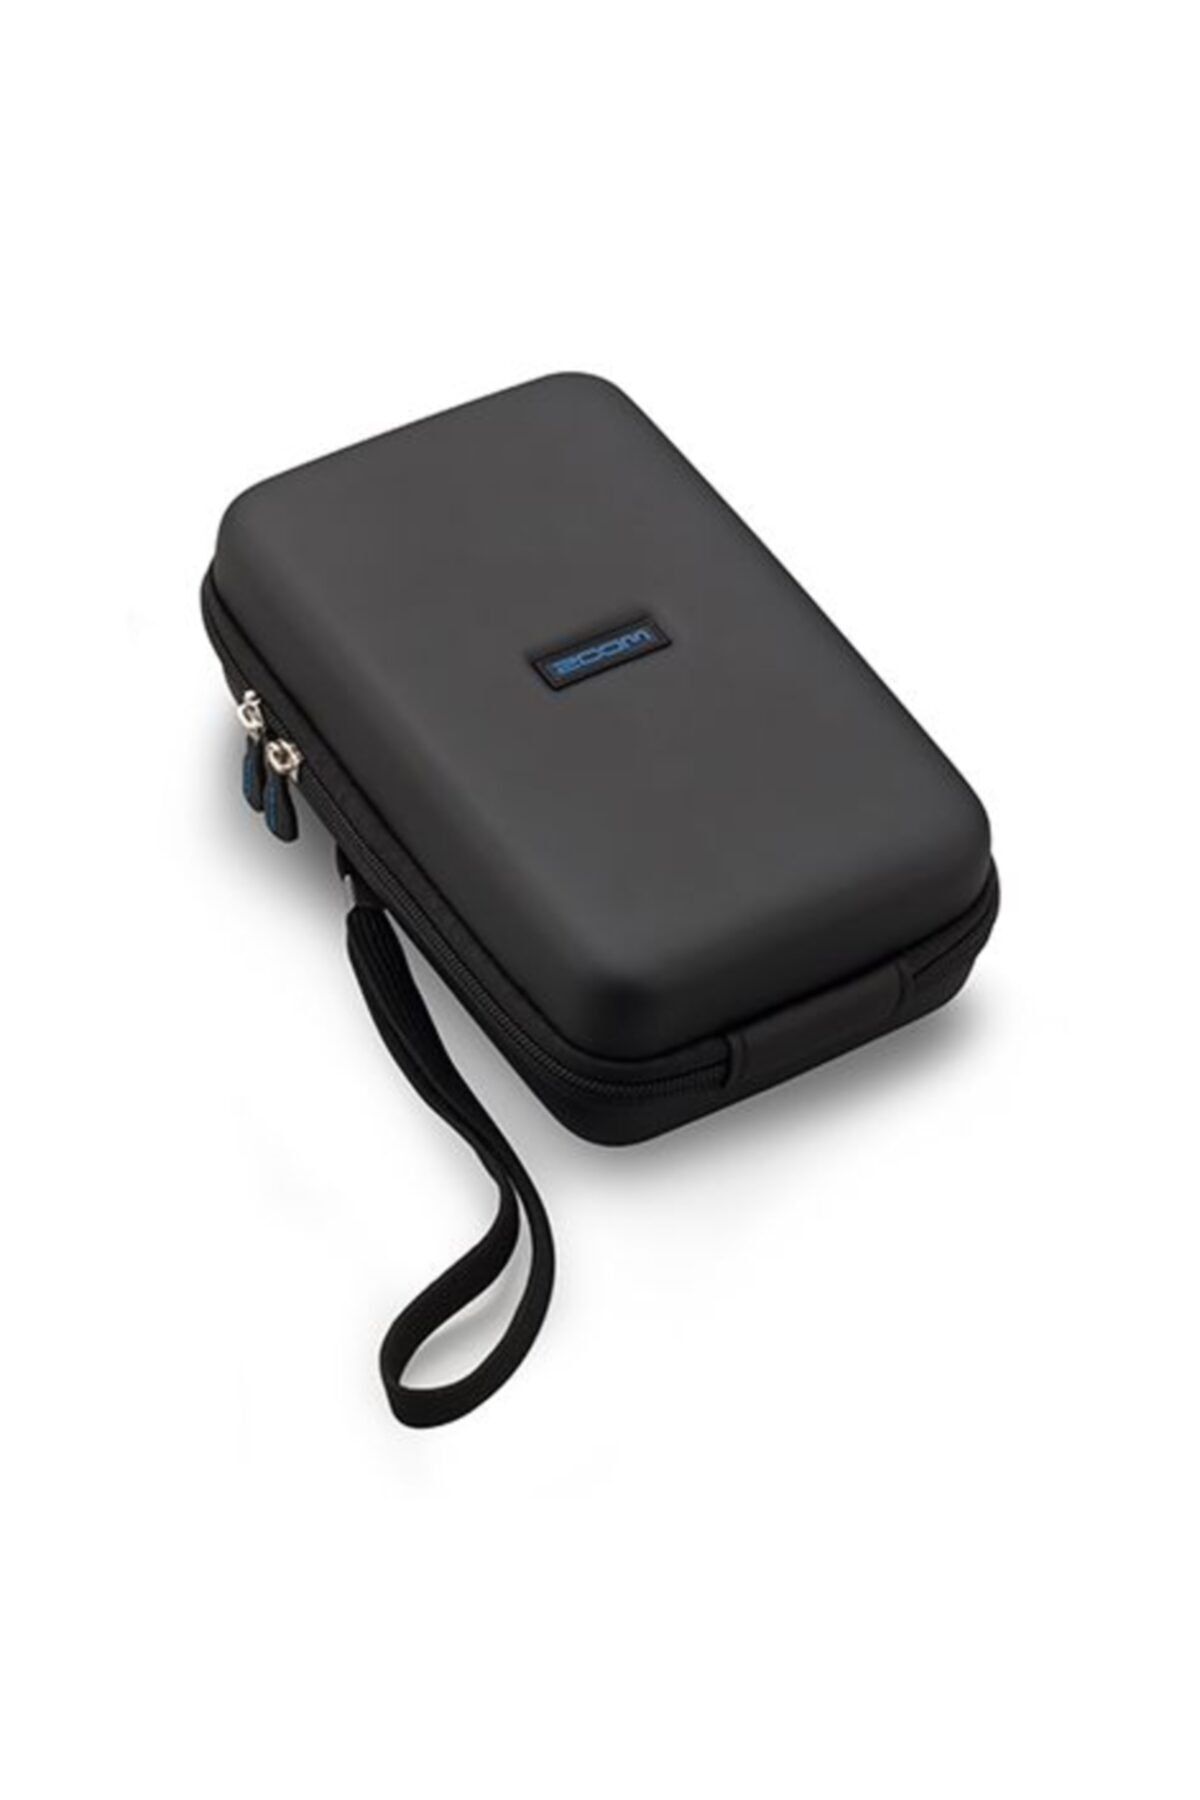 Zoom Scq-8 Carrying Case